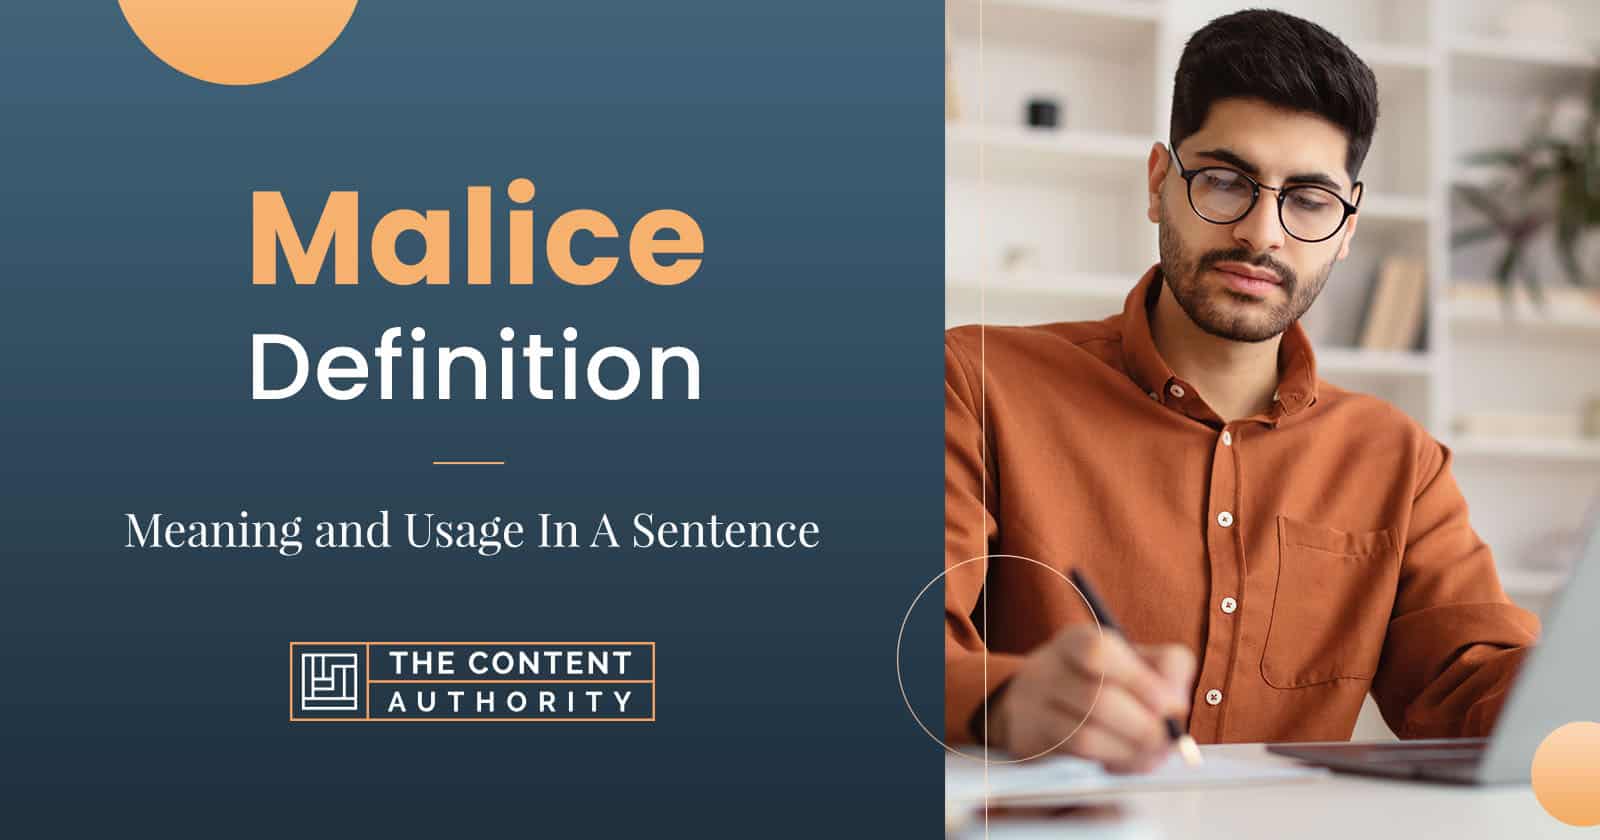 Malice Definition – Meaning and Usage in a Sentence